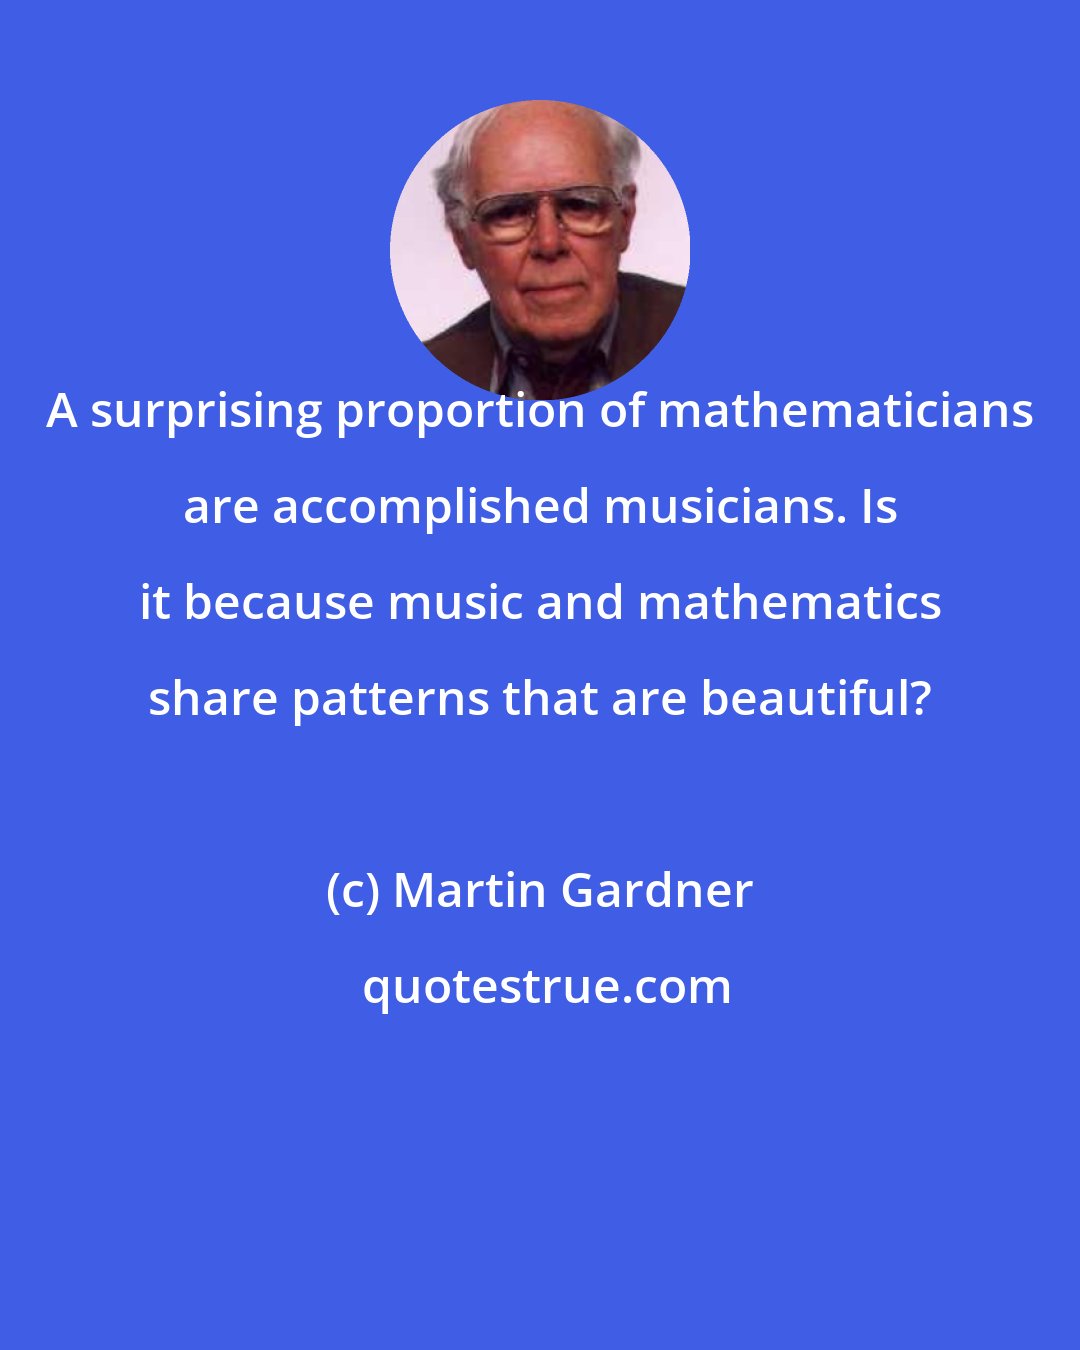 Martin Gardner: A surprising proportion of mathematicians are accomplished musicians. Is it because music and mathematics share patterns that are beautiful?